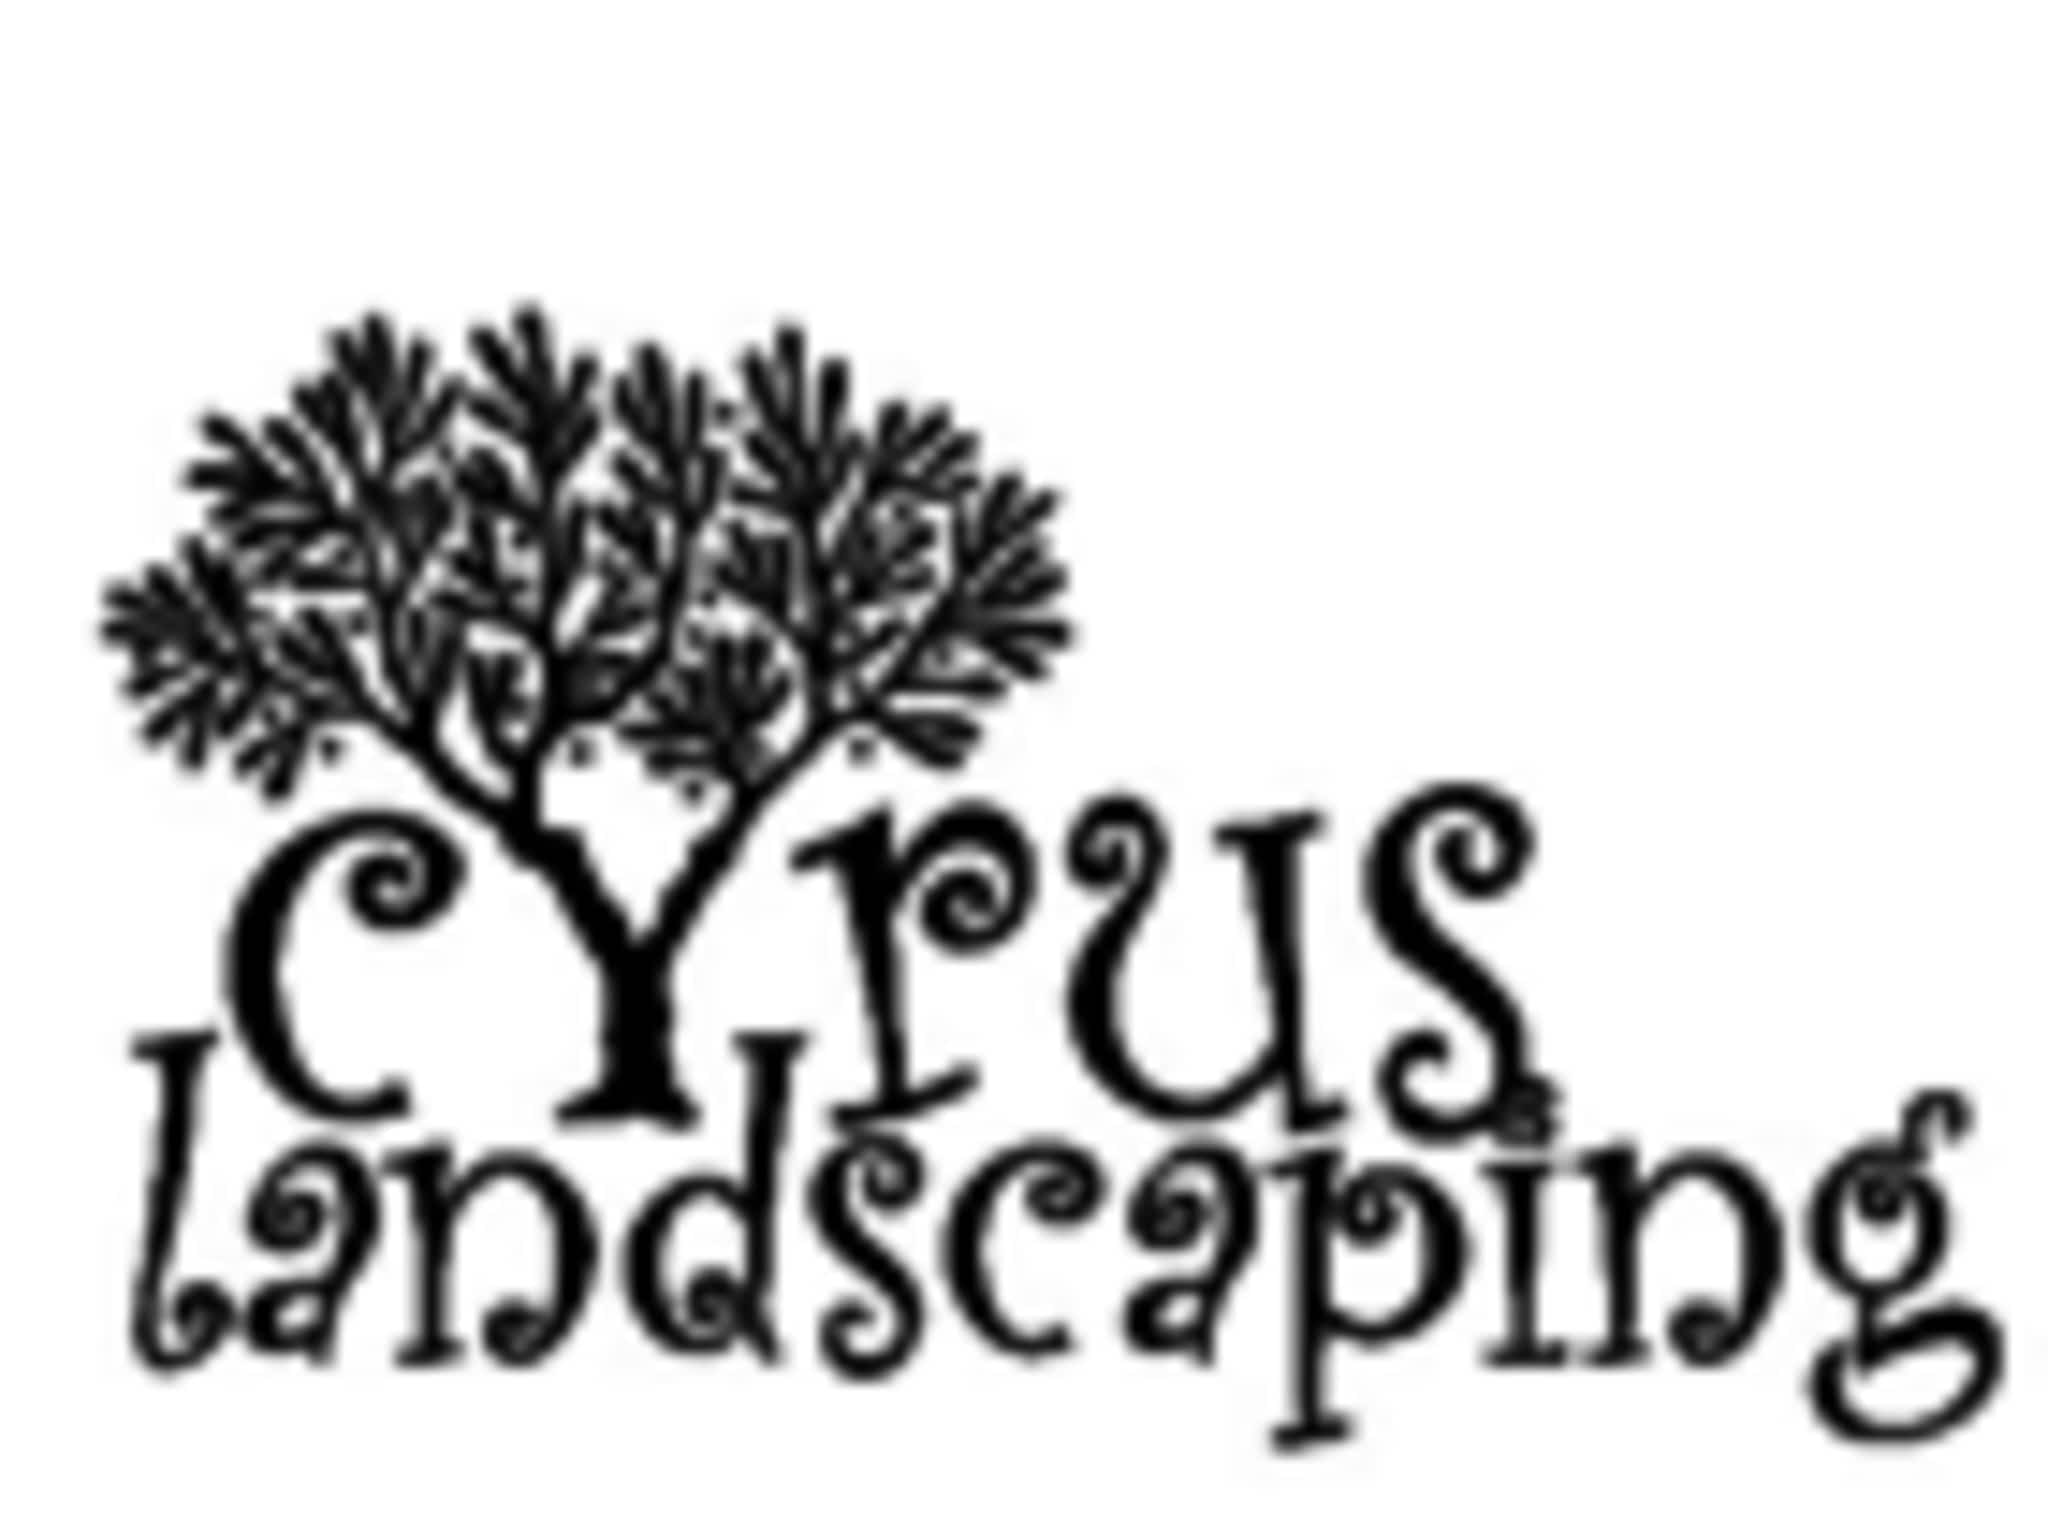 photo Cyrus Landscaping